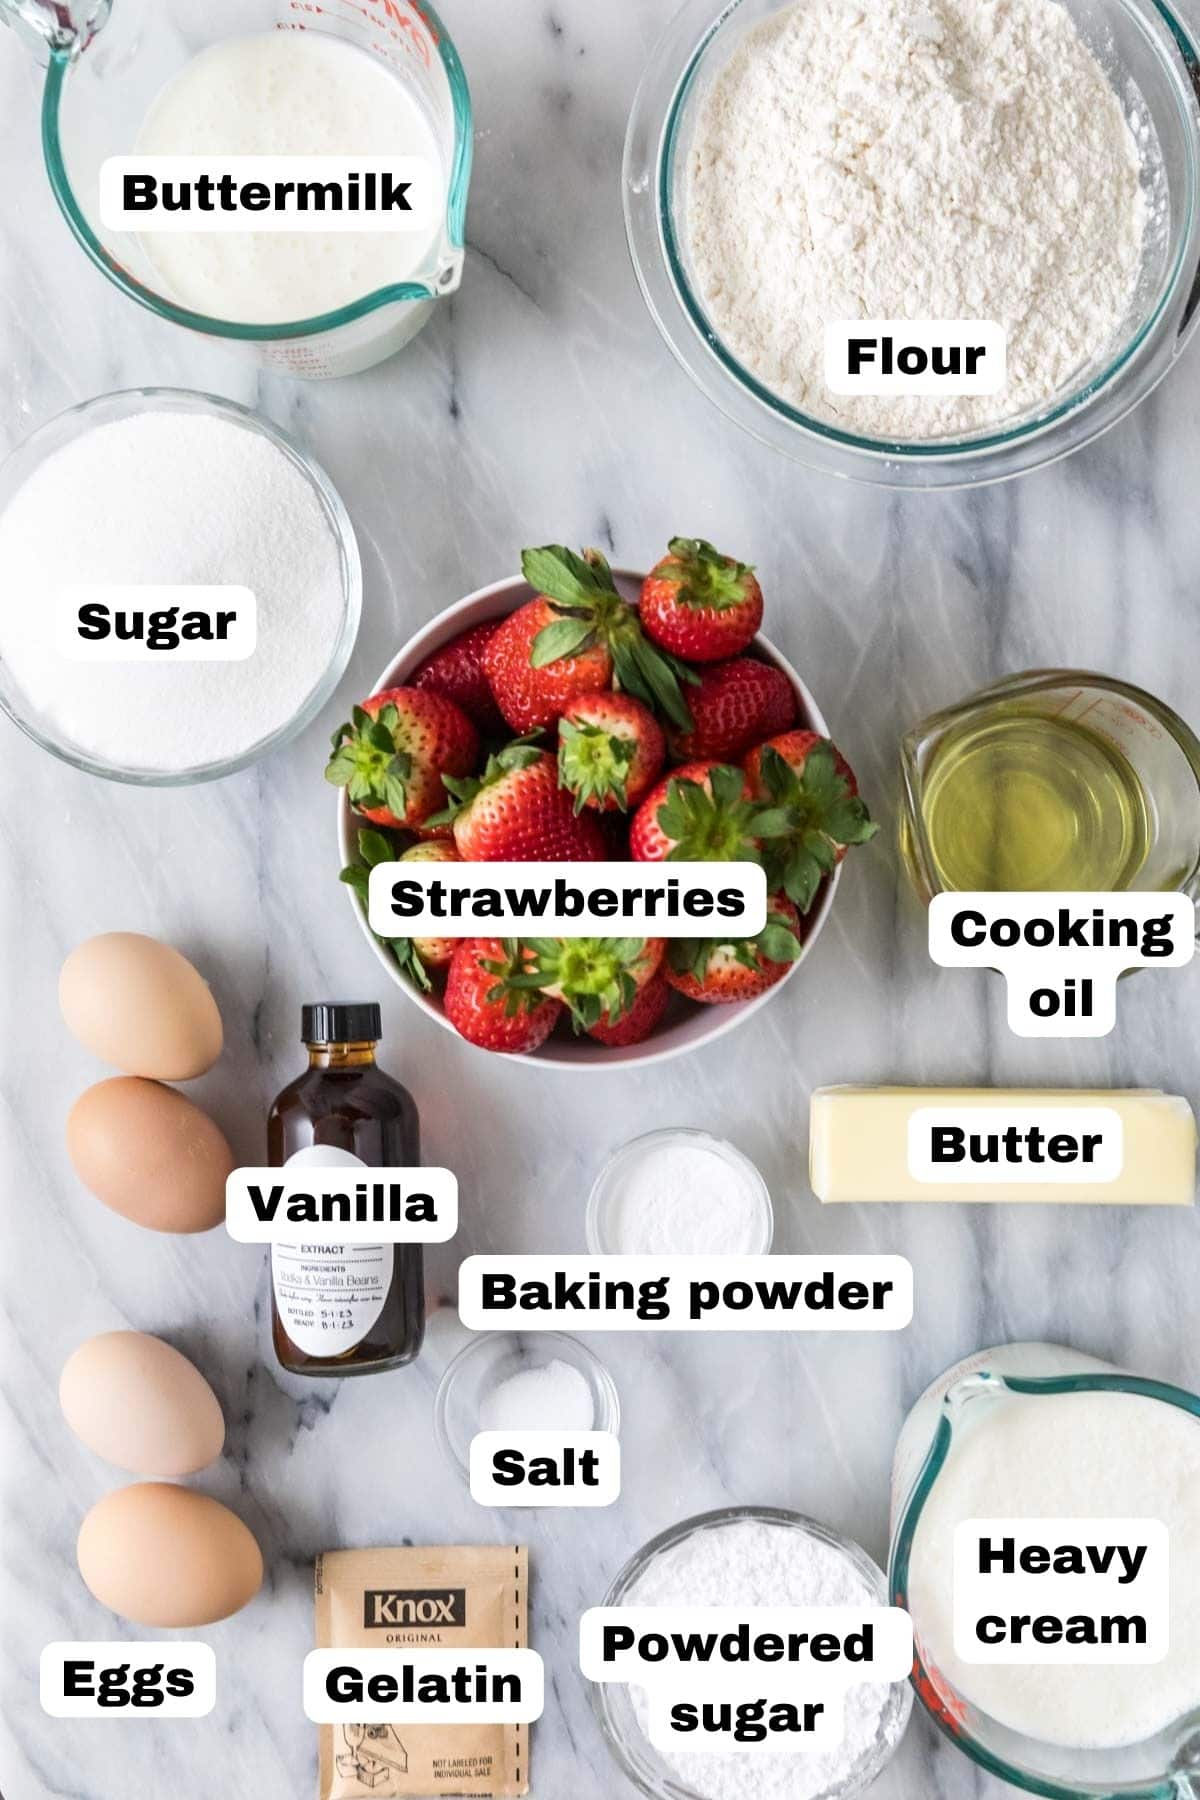 Overhead view of labelled ingredients including strawberries, gelatin, flour, cream, and more.